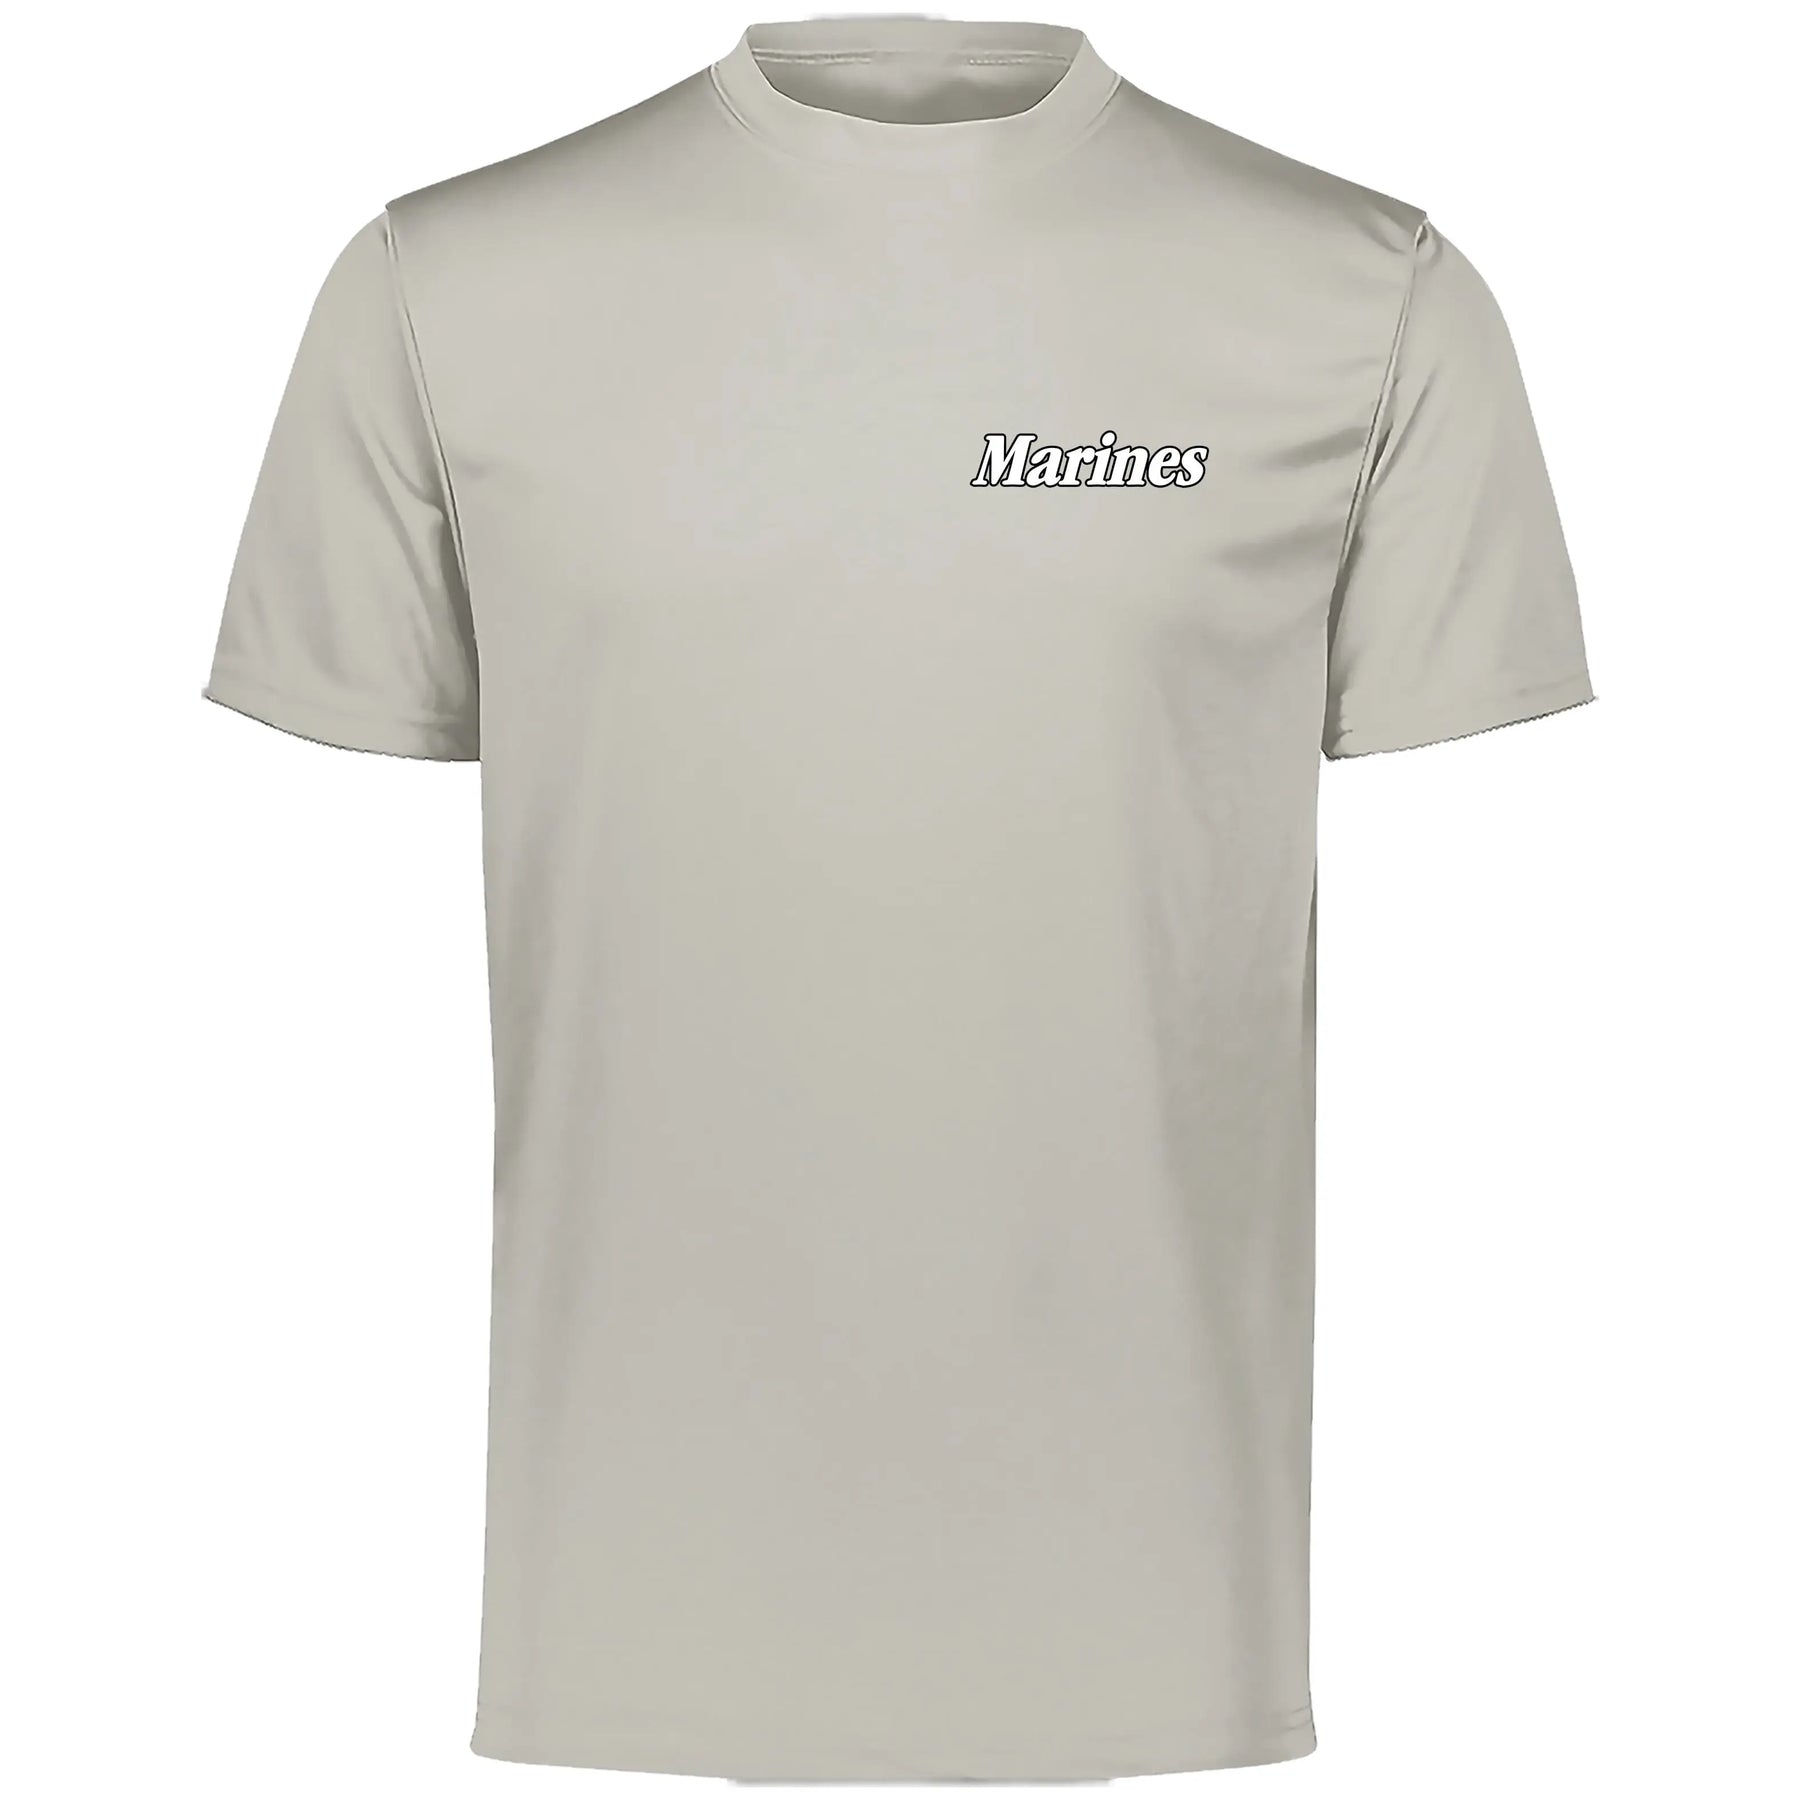 Closeout Marines Chest Seal Performance Tee